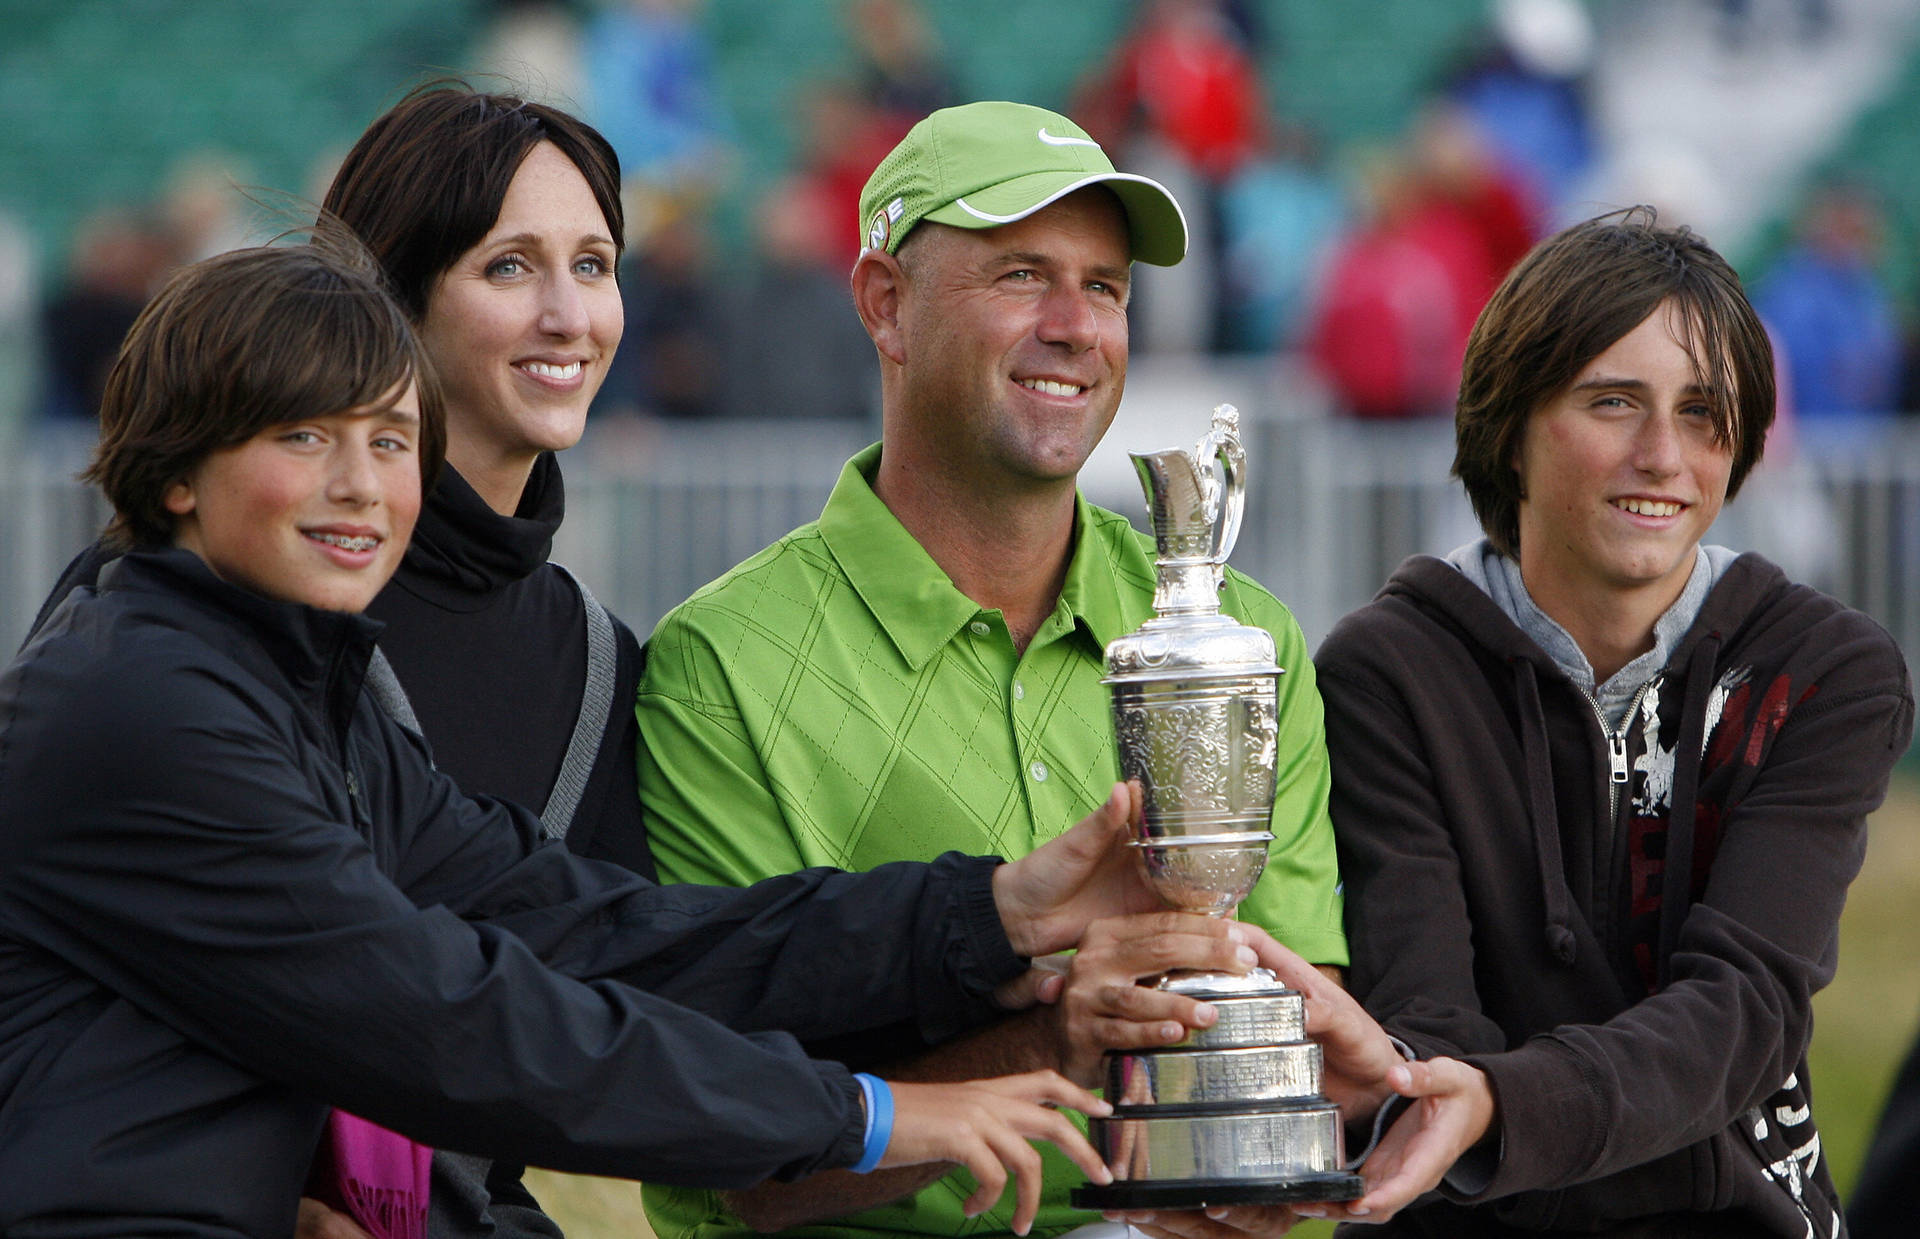 Triumph of Family Support – Stewart Cink with Family flaunting award Wallpaper